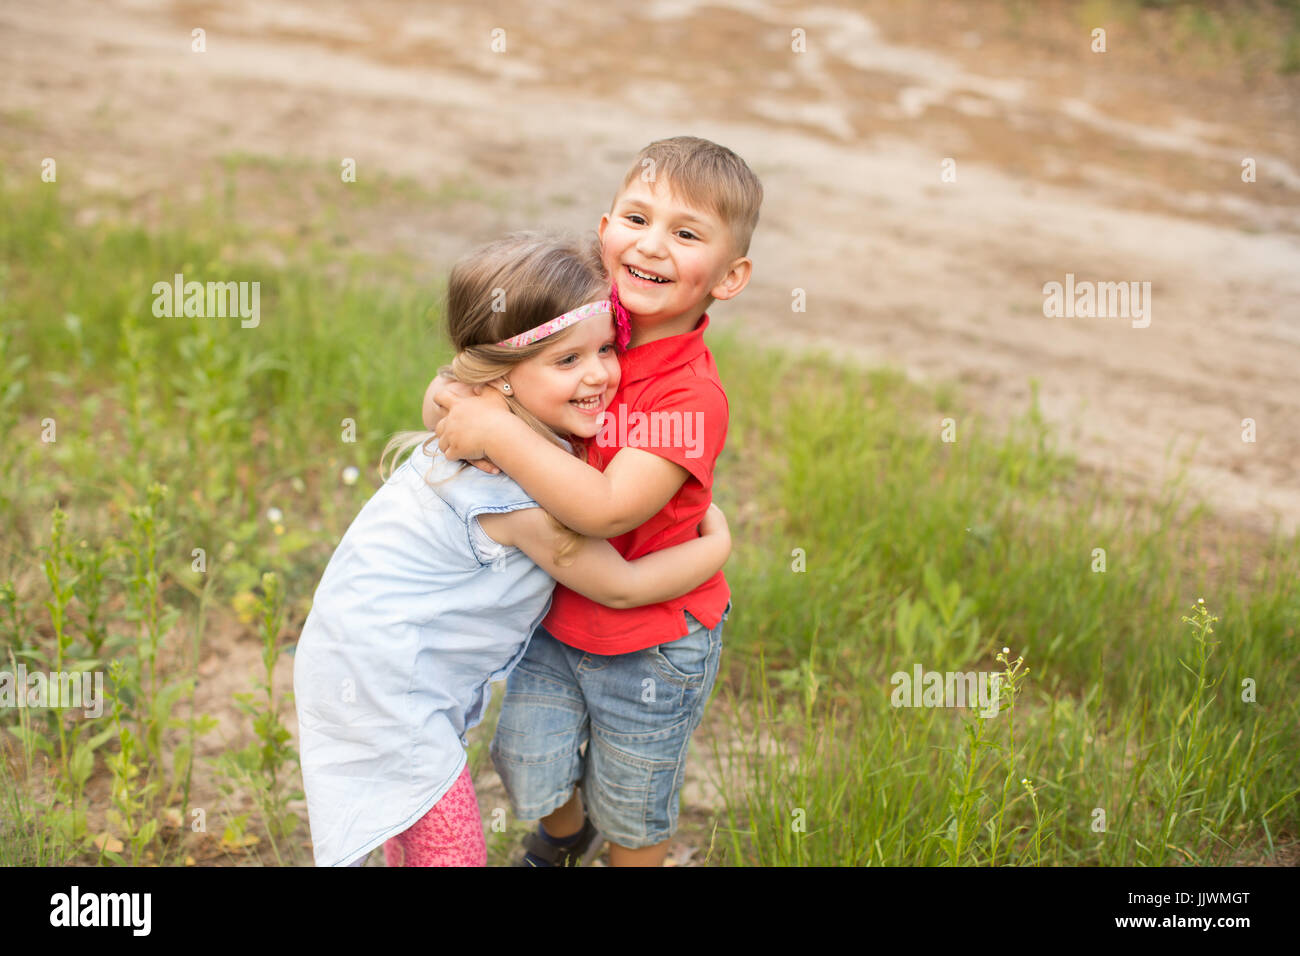 Funny children in the summer park Stock Photo